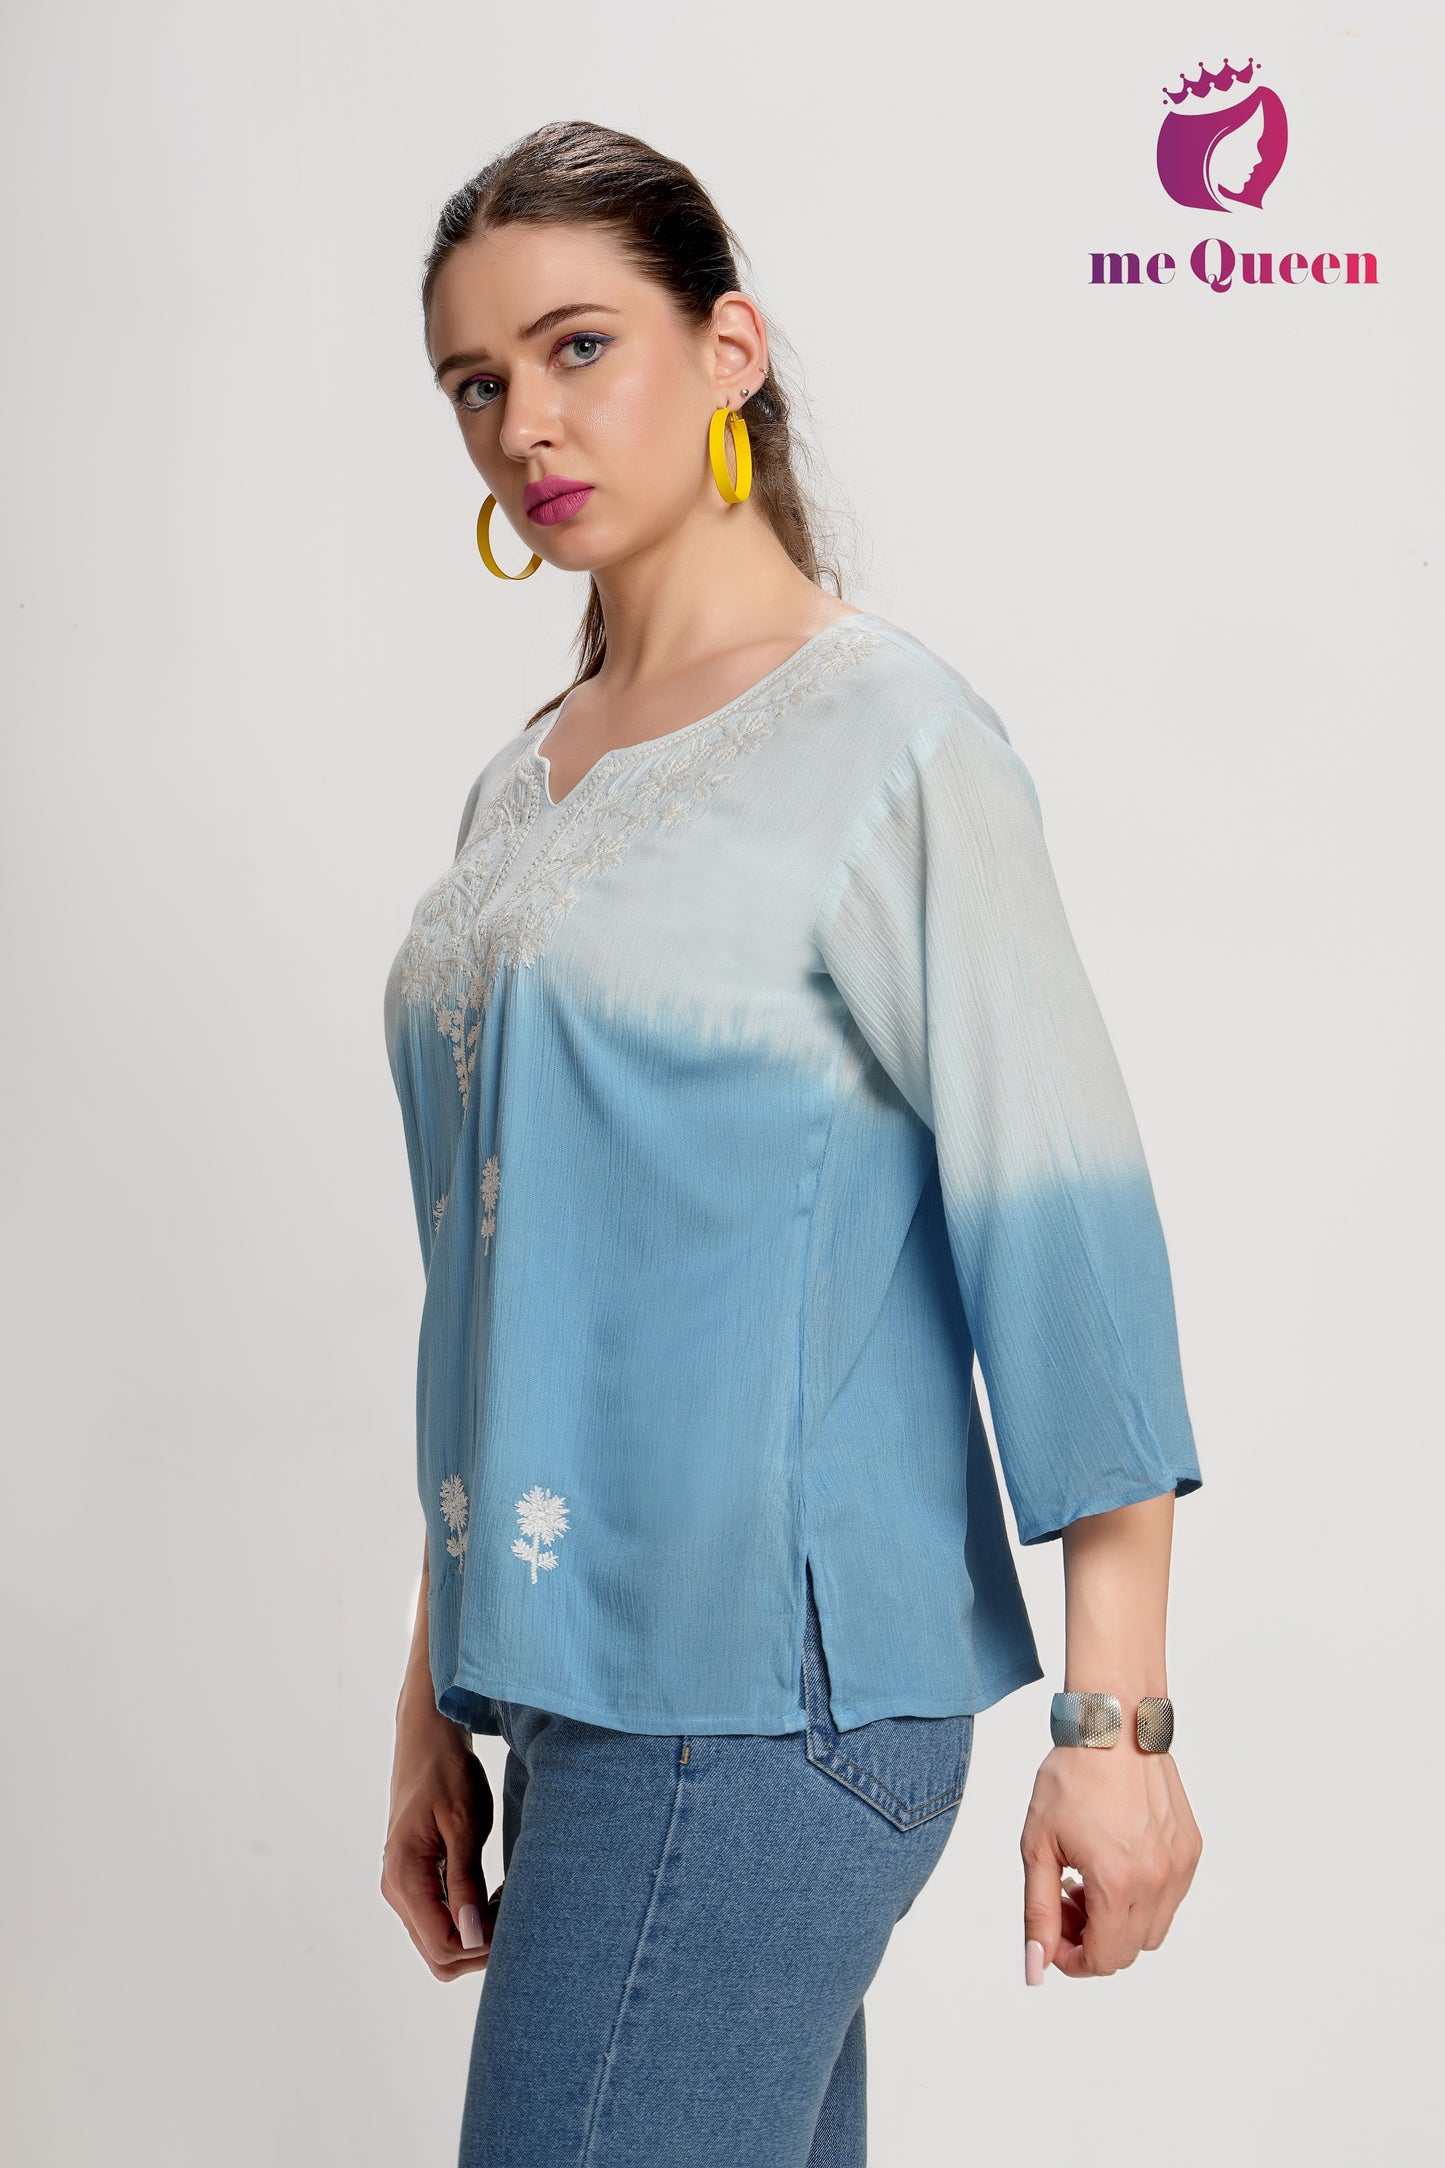 MeQueen's Blue Ombre:  A Touch of Delicate Embroidery